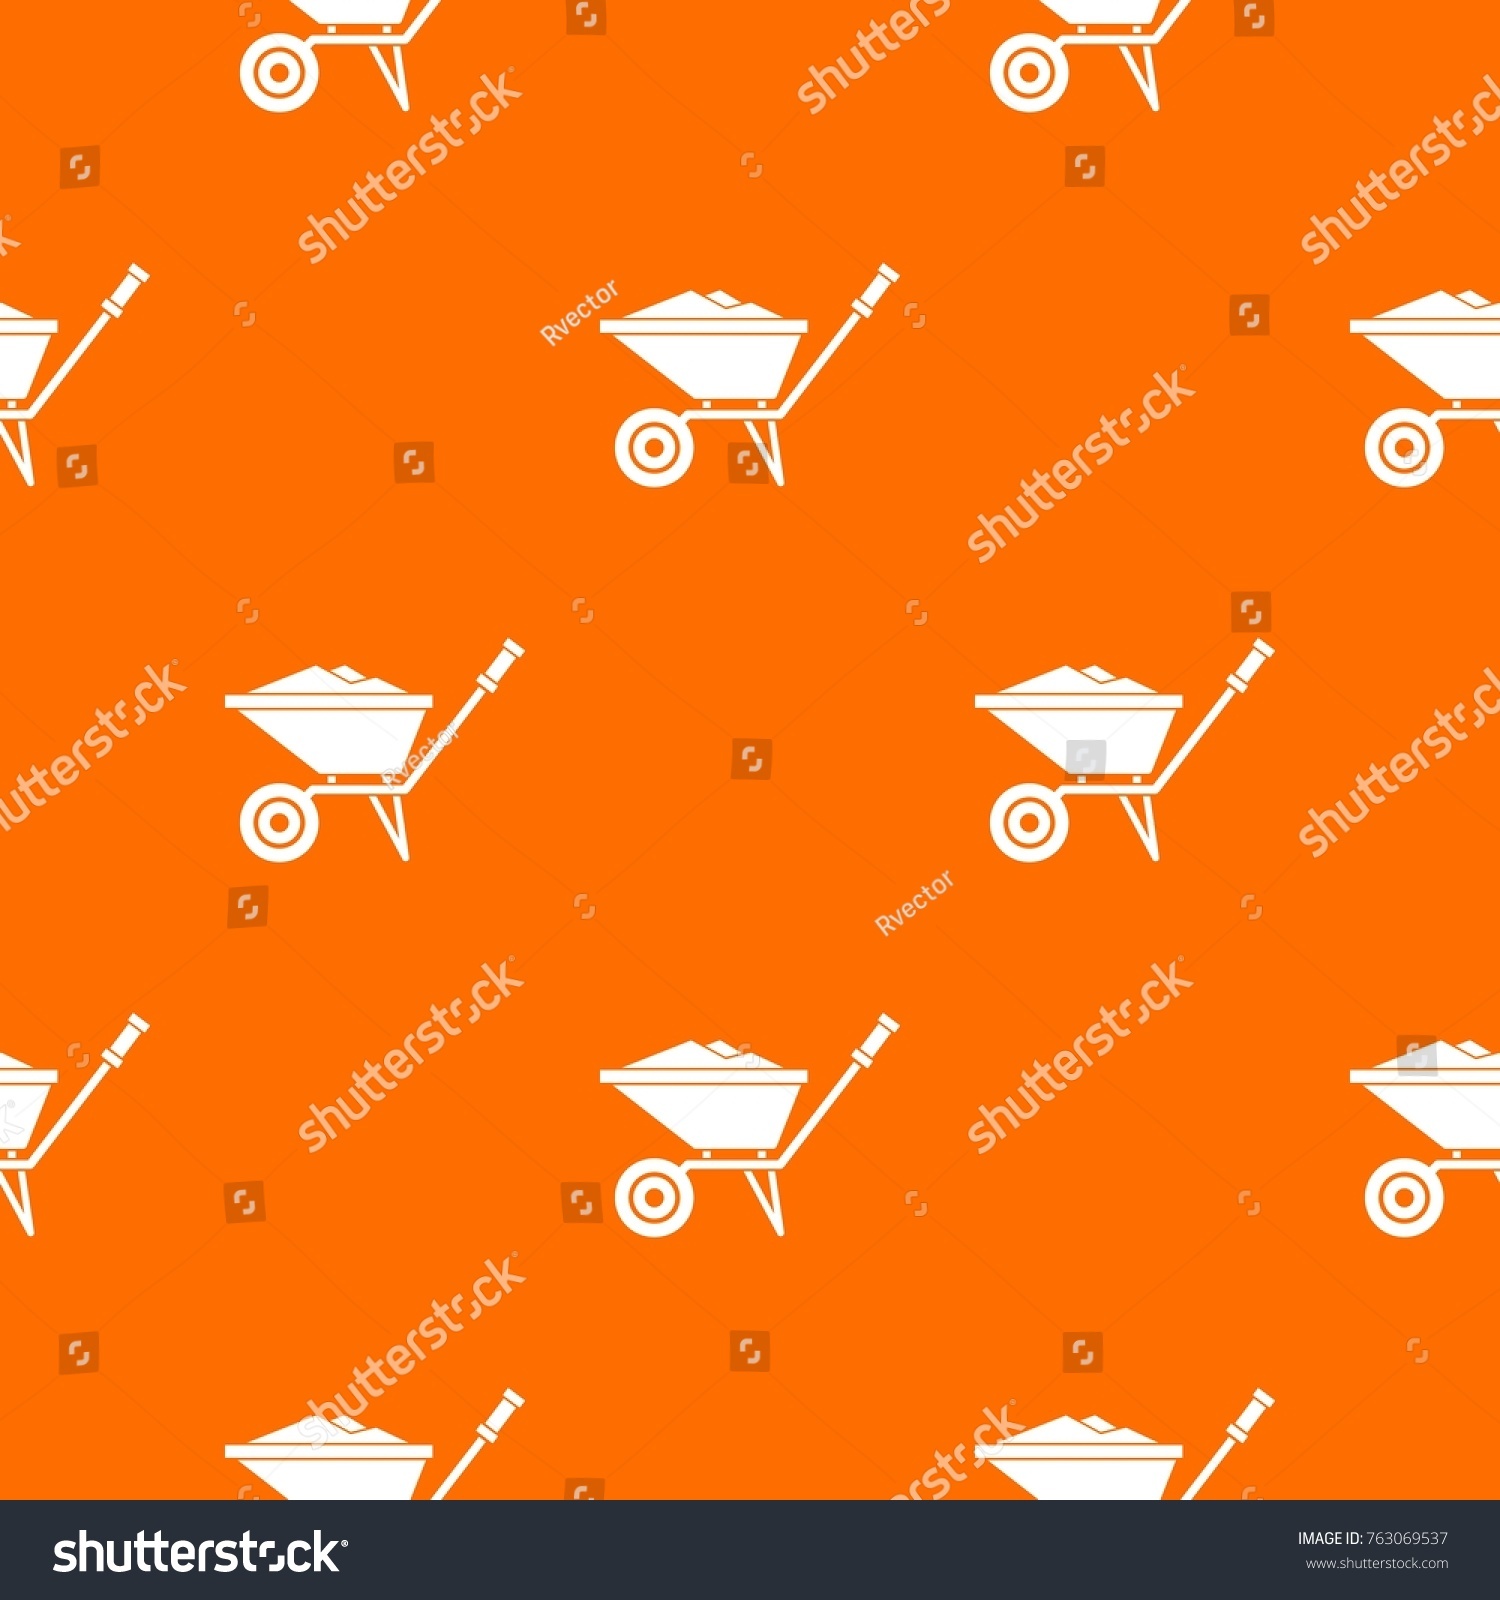 SVG of Wheelbarrow pattern repeat seamless in orange color for any design. Vector geometric illustration svg